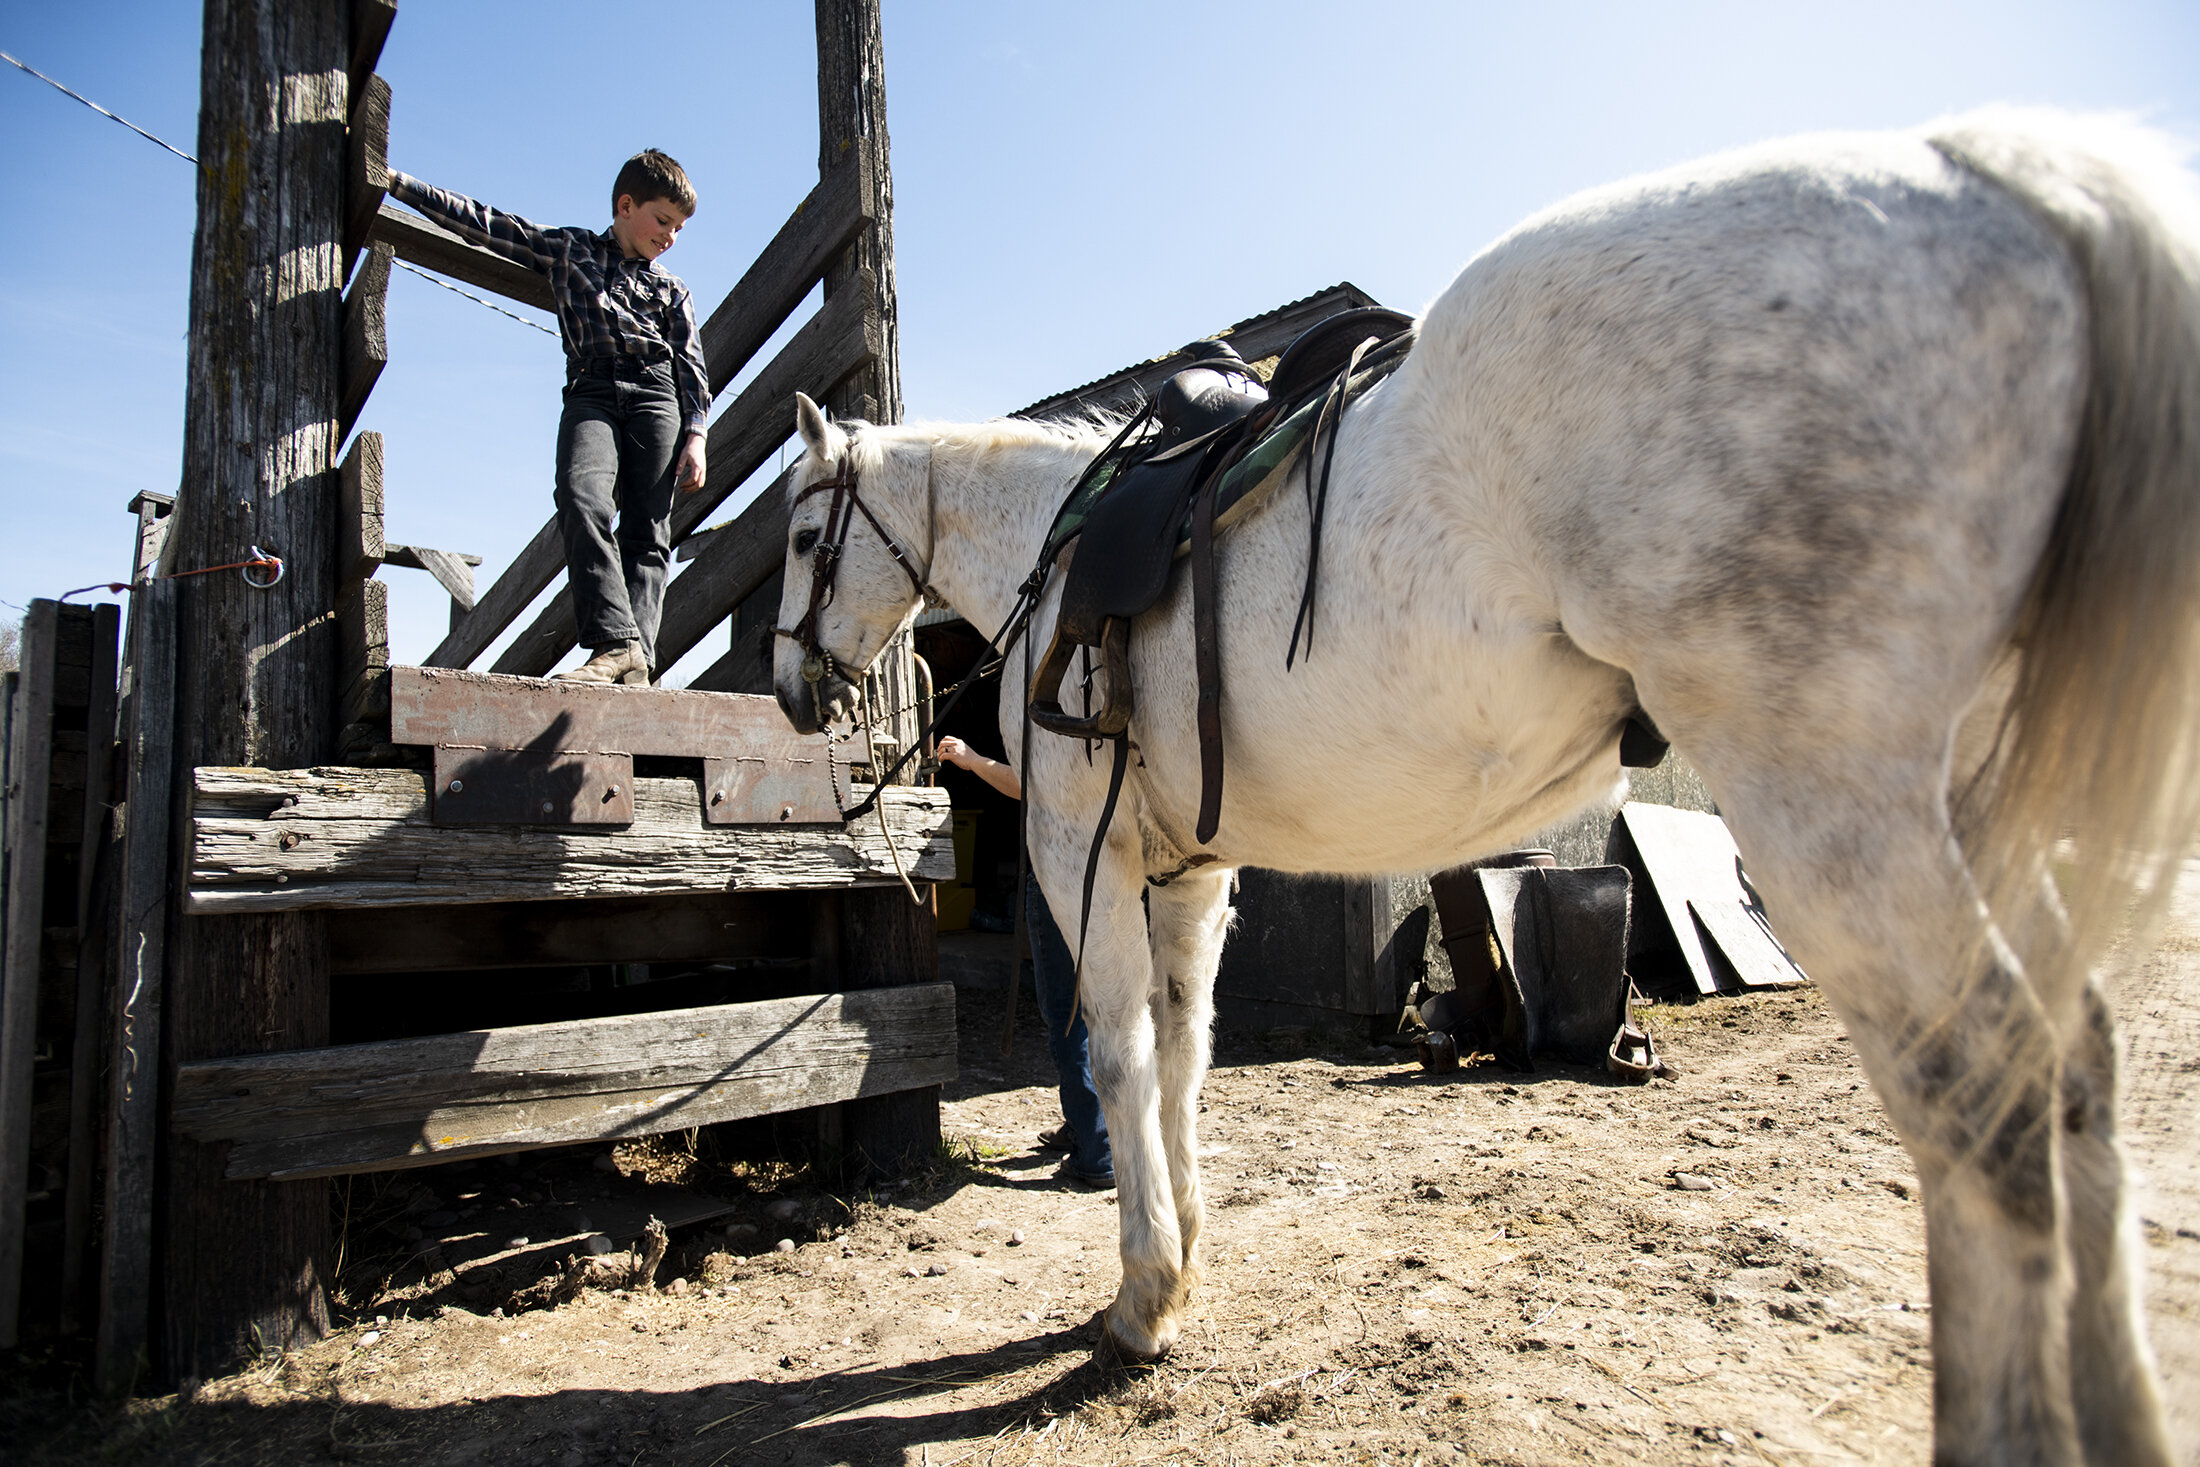  Clay Lewis, the son of cattle ranchers Jim and Carly Lewis, waits to saddle-up on Monster, his 17-year-old horse at the family’s Triple L Livestock cattle ranch in Frenchtown, Mont. on April 8, 2020. 